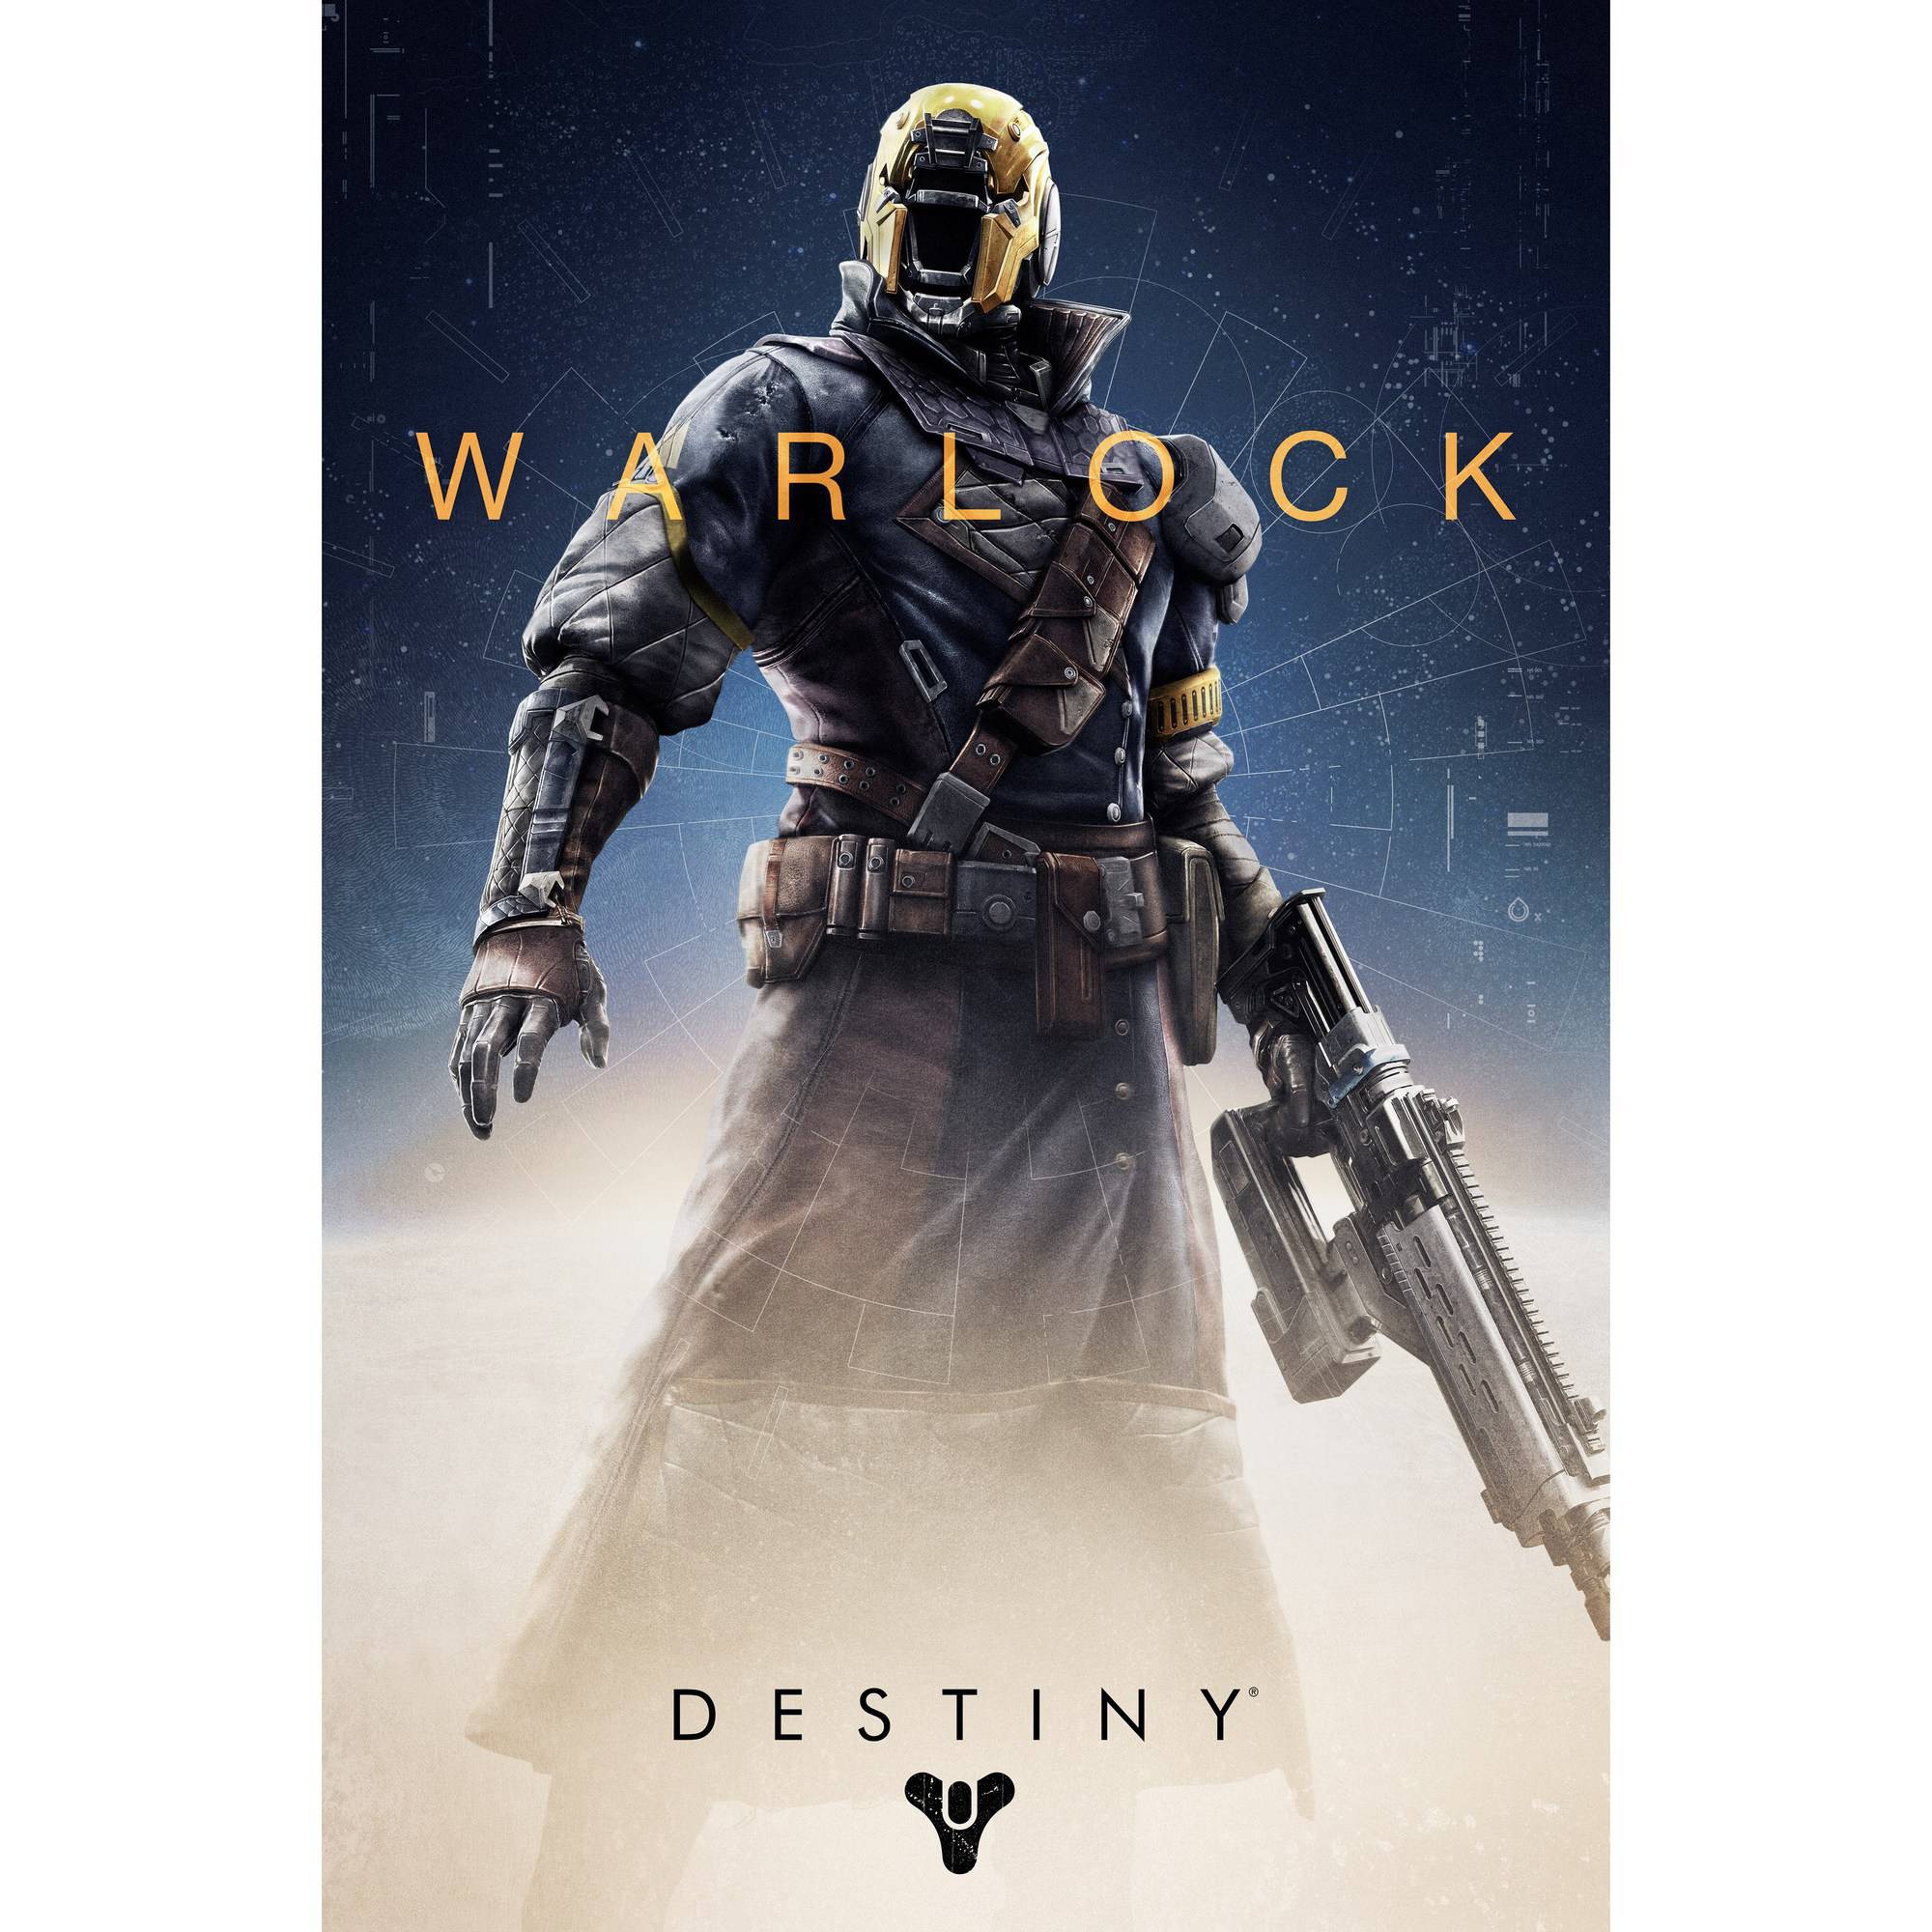 Destiny: The Taken King Legendary Edition, Activision, PlayStation 4, 047875874428 - image 30 of 31